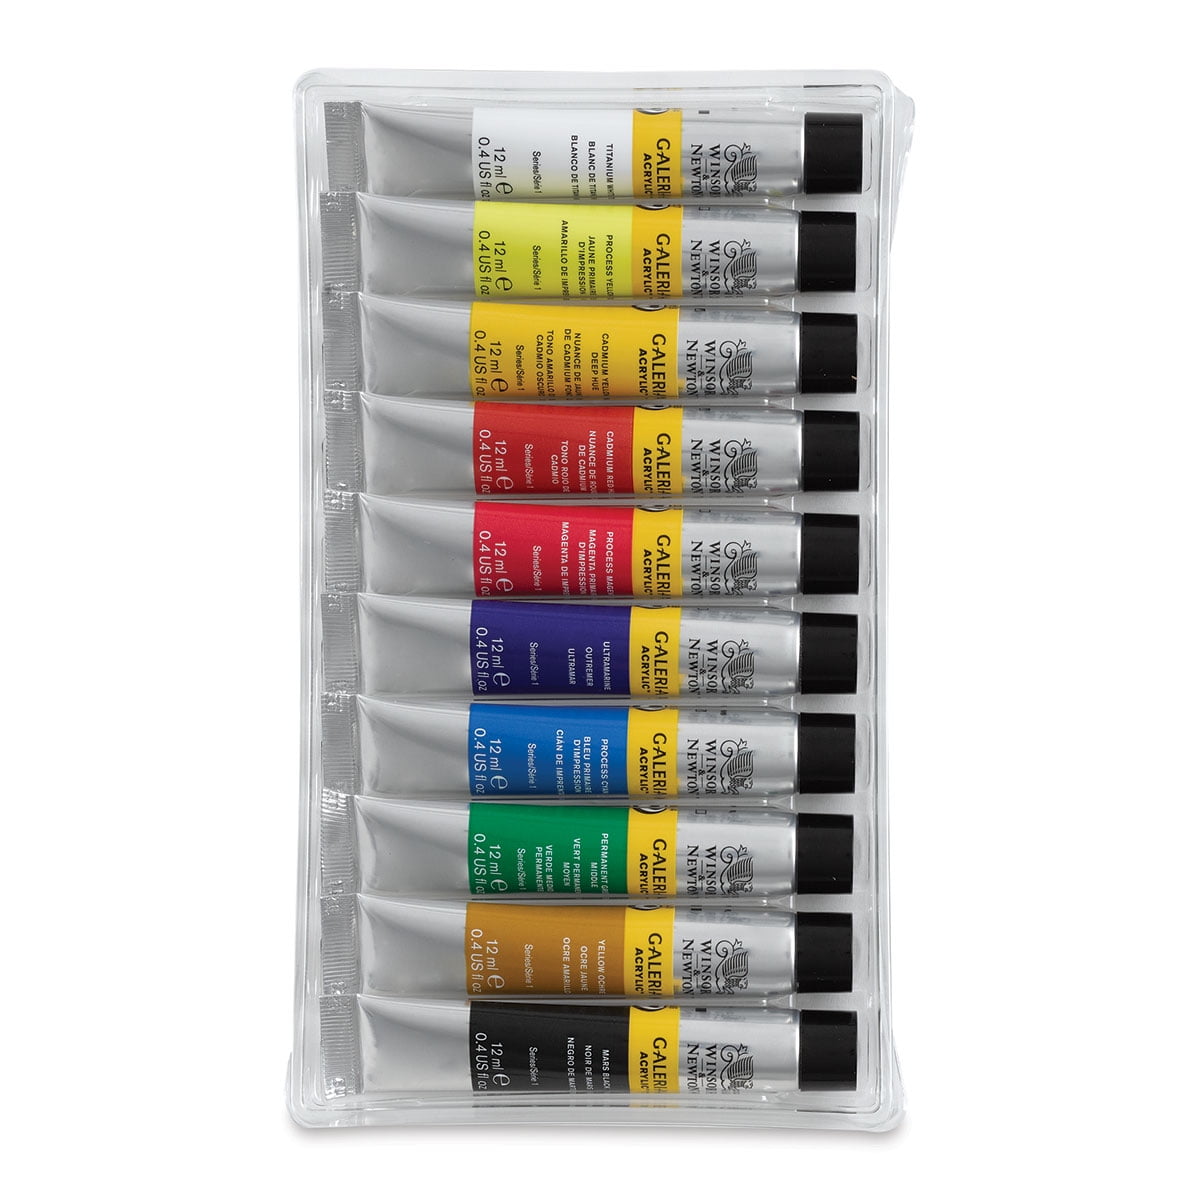 Marie's Artist Gouache Paint Sets - Highly Pigmented Gouache for Painting,  Artists, Illustrators & Designers - Set of 12 Assorted Color Tubes